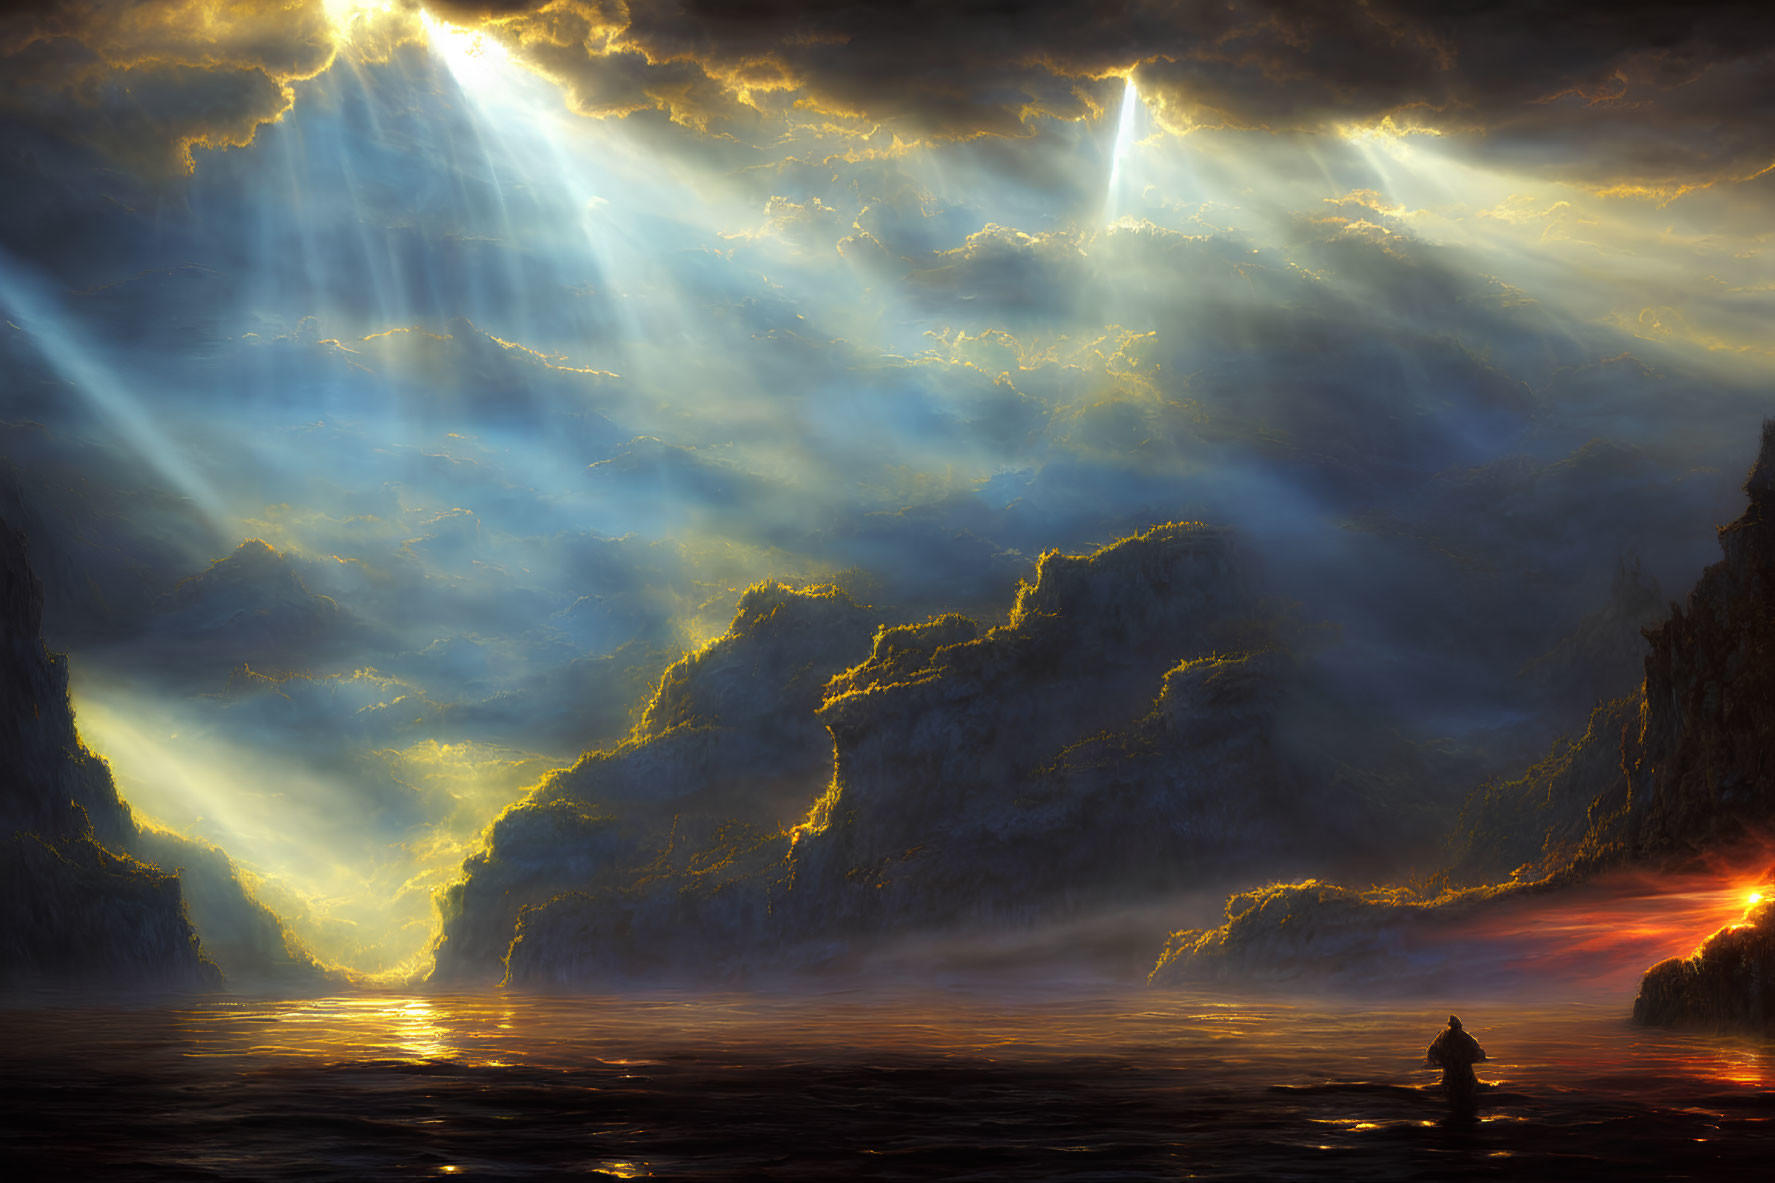 Figure in boat on dark sea under dramatic sky with sunlight rays and towering cliffs.